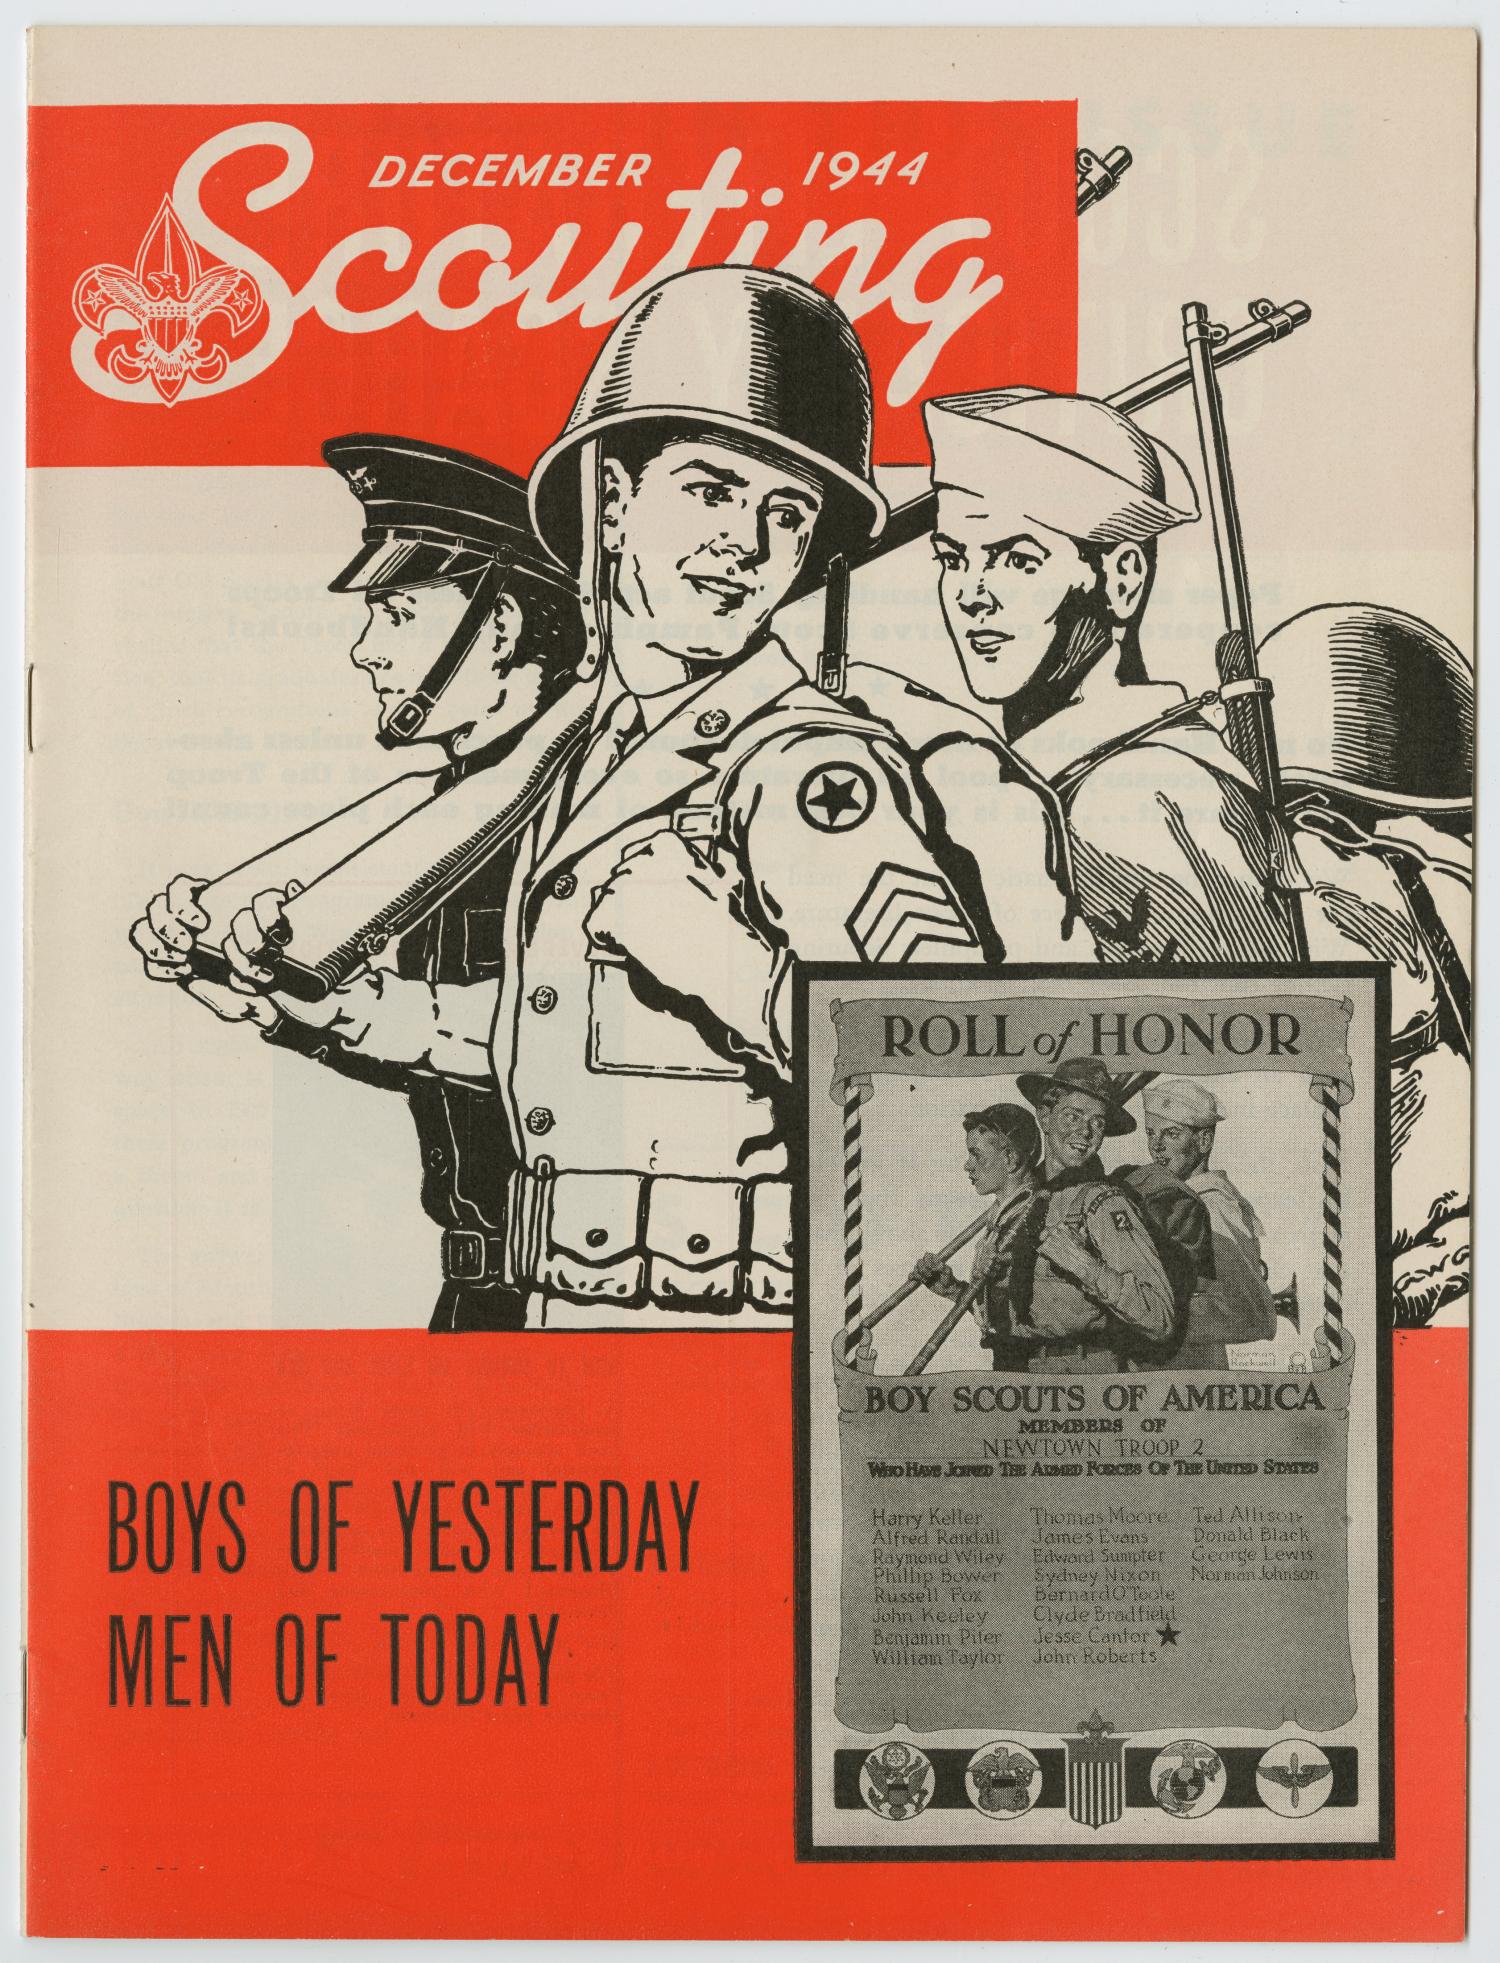 Scouting, Volume 32, Number 10, December 1944
                                                
                                                    Front Cover
                                                